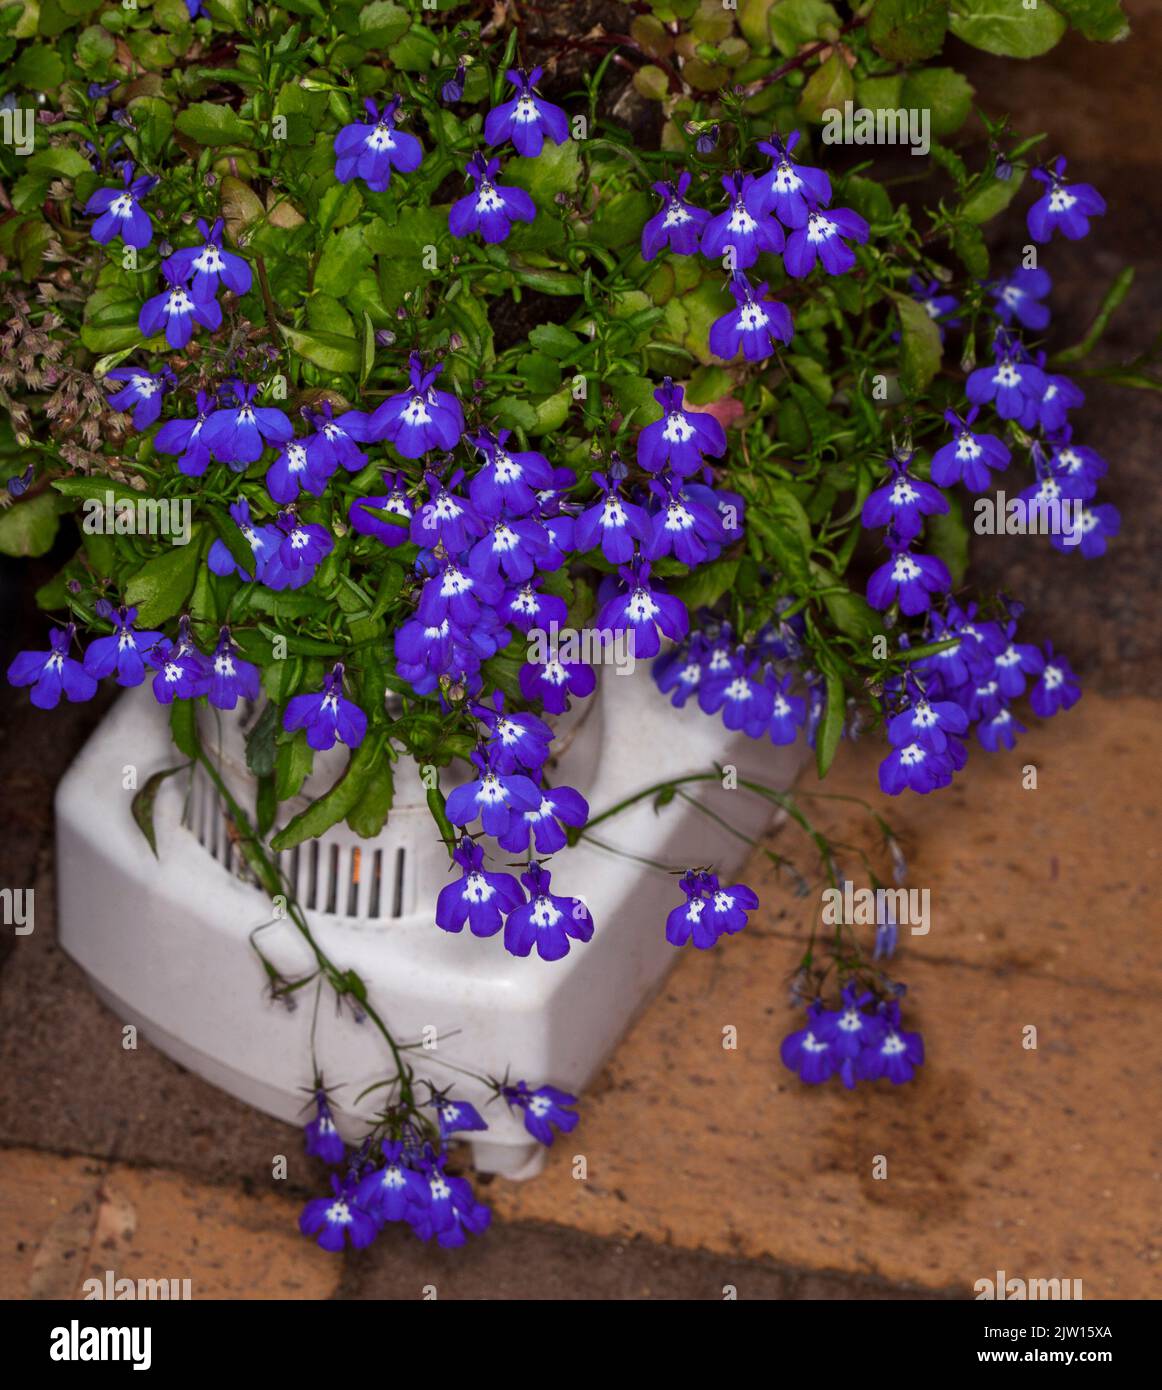 Mass of vivid blue flowers of annual Lobelia growing in and spilling over sides of unusual container, a recycled juice blender, in Australia Stock Photo